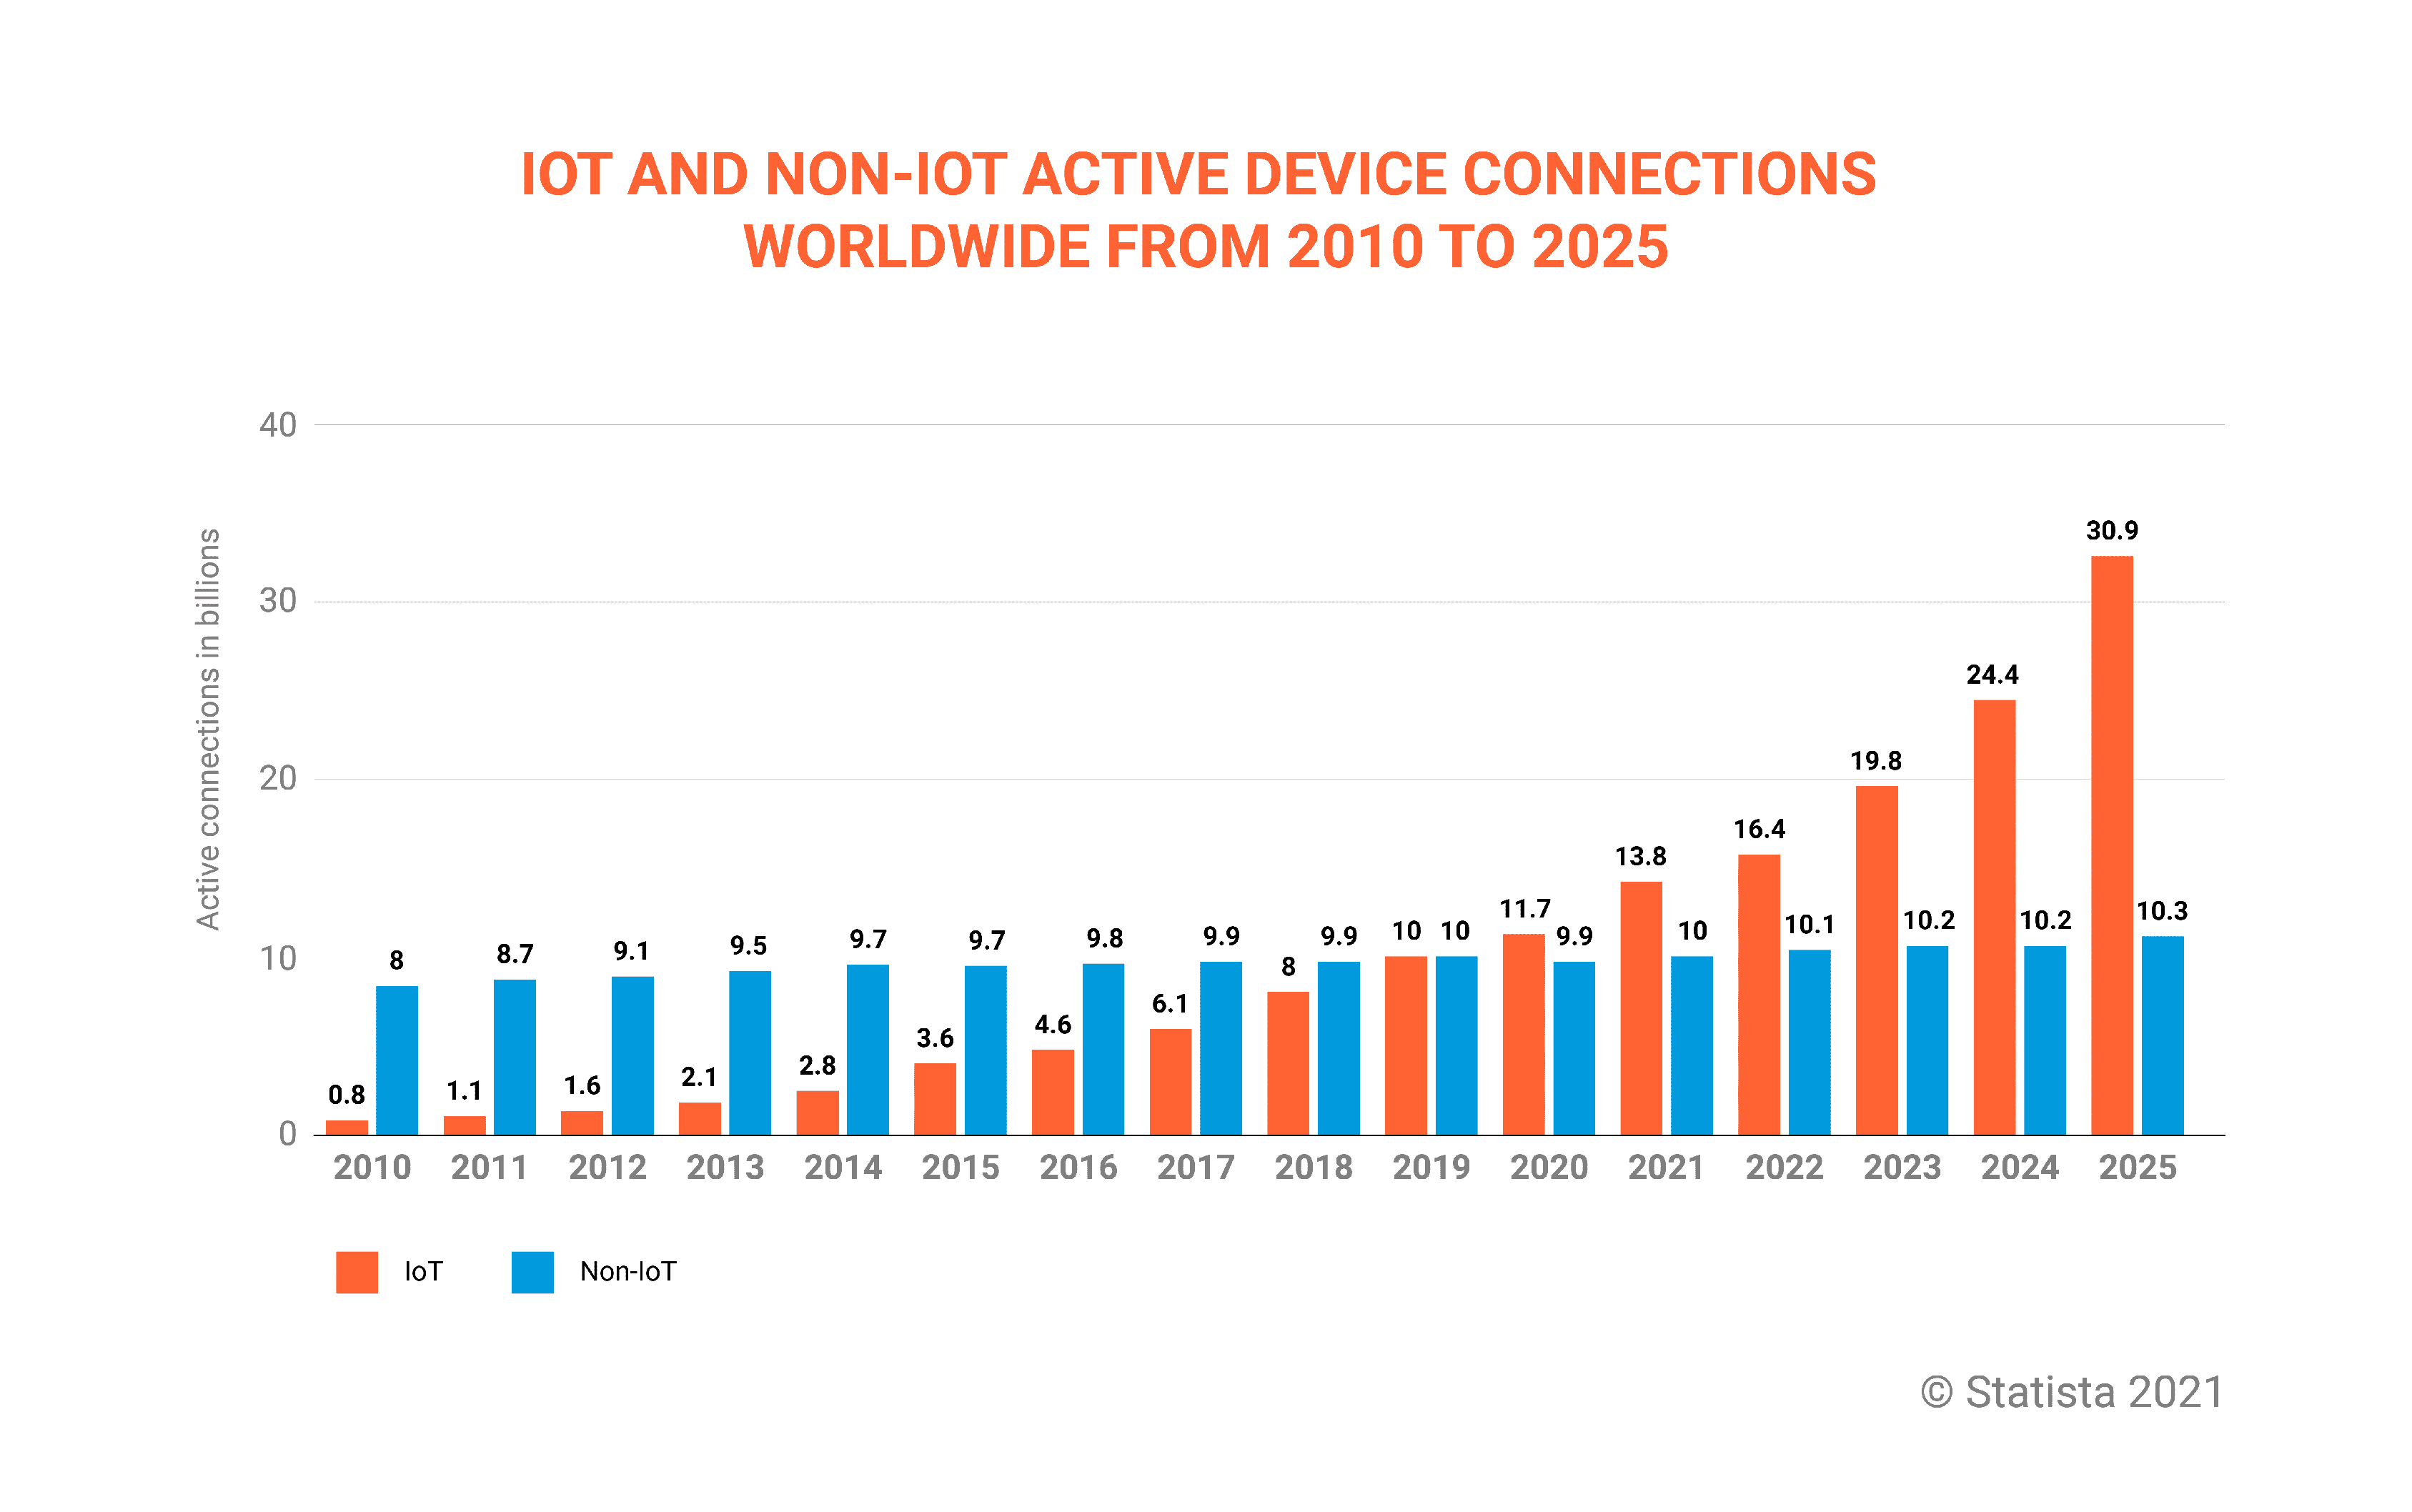 IoT and non-IoT active device connections worldwide from 2010 to 2025